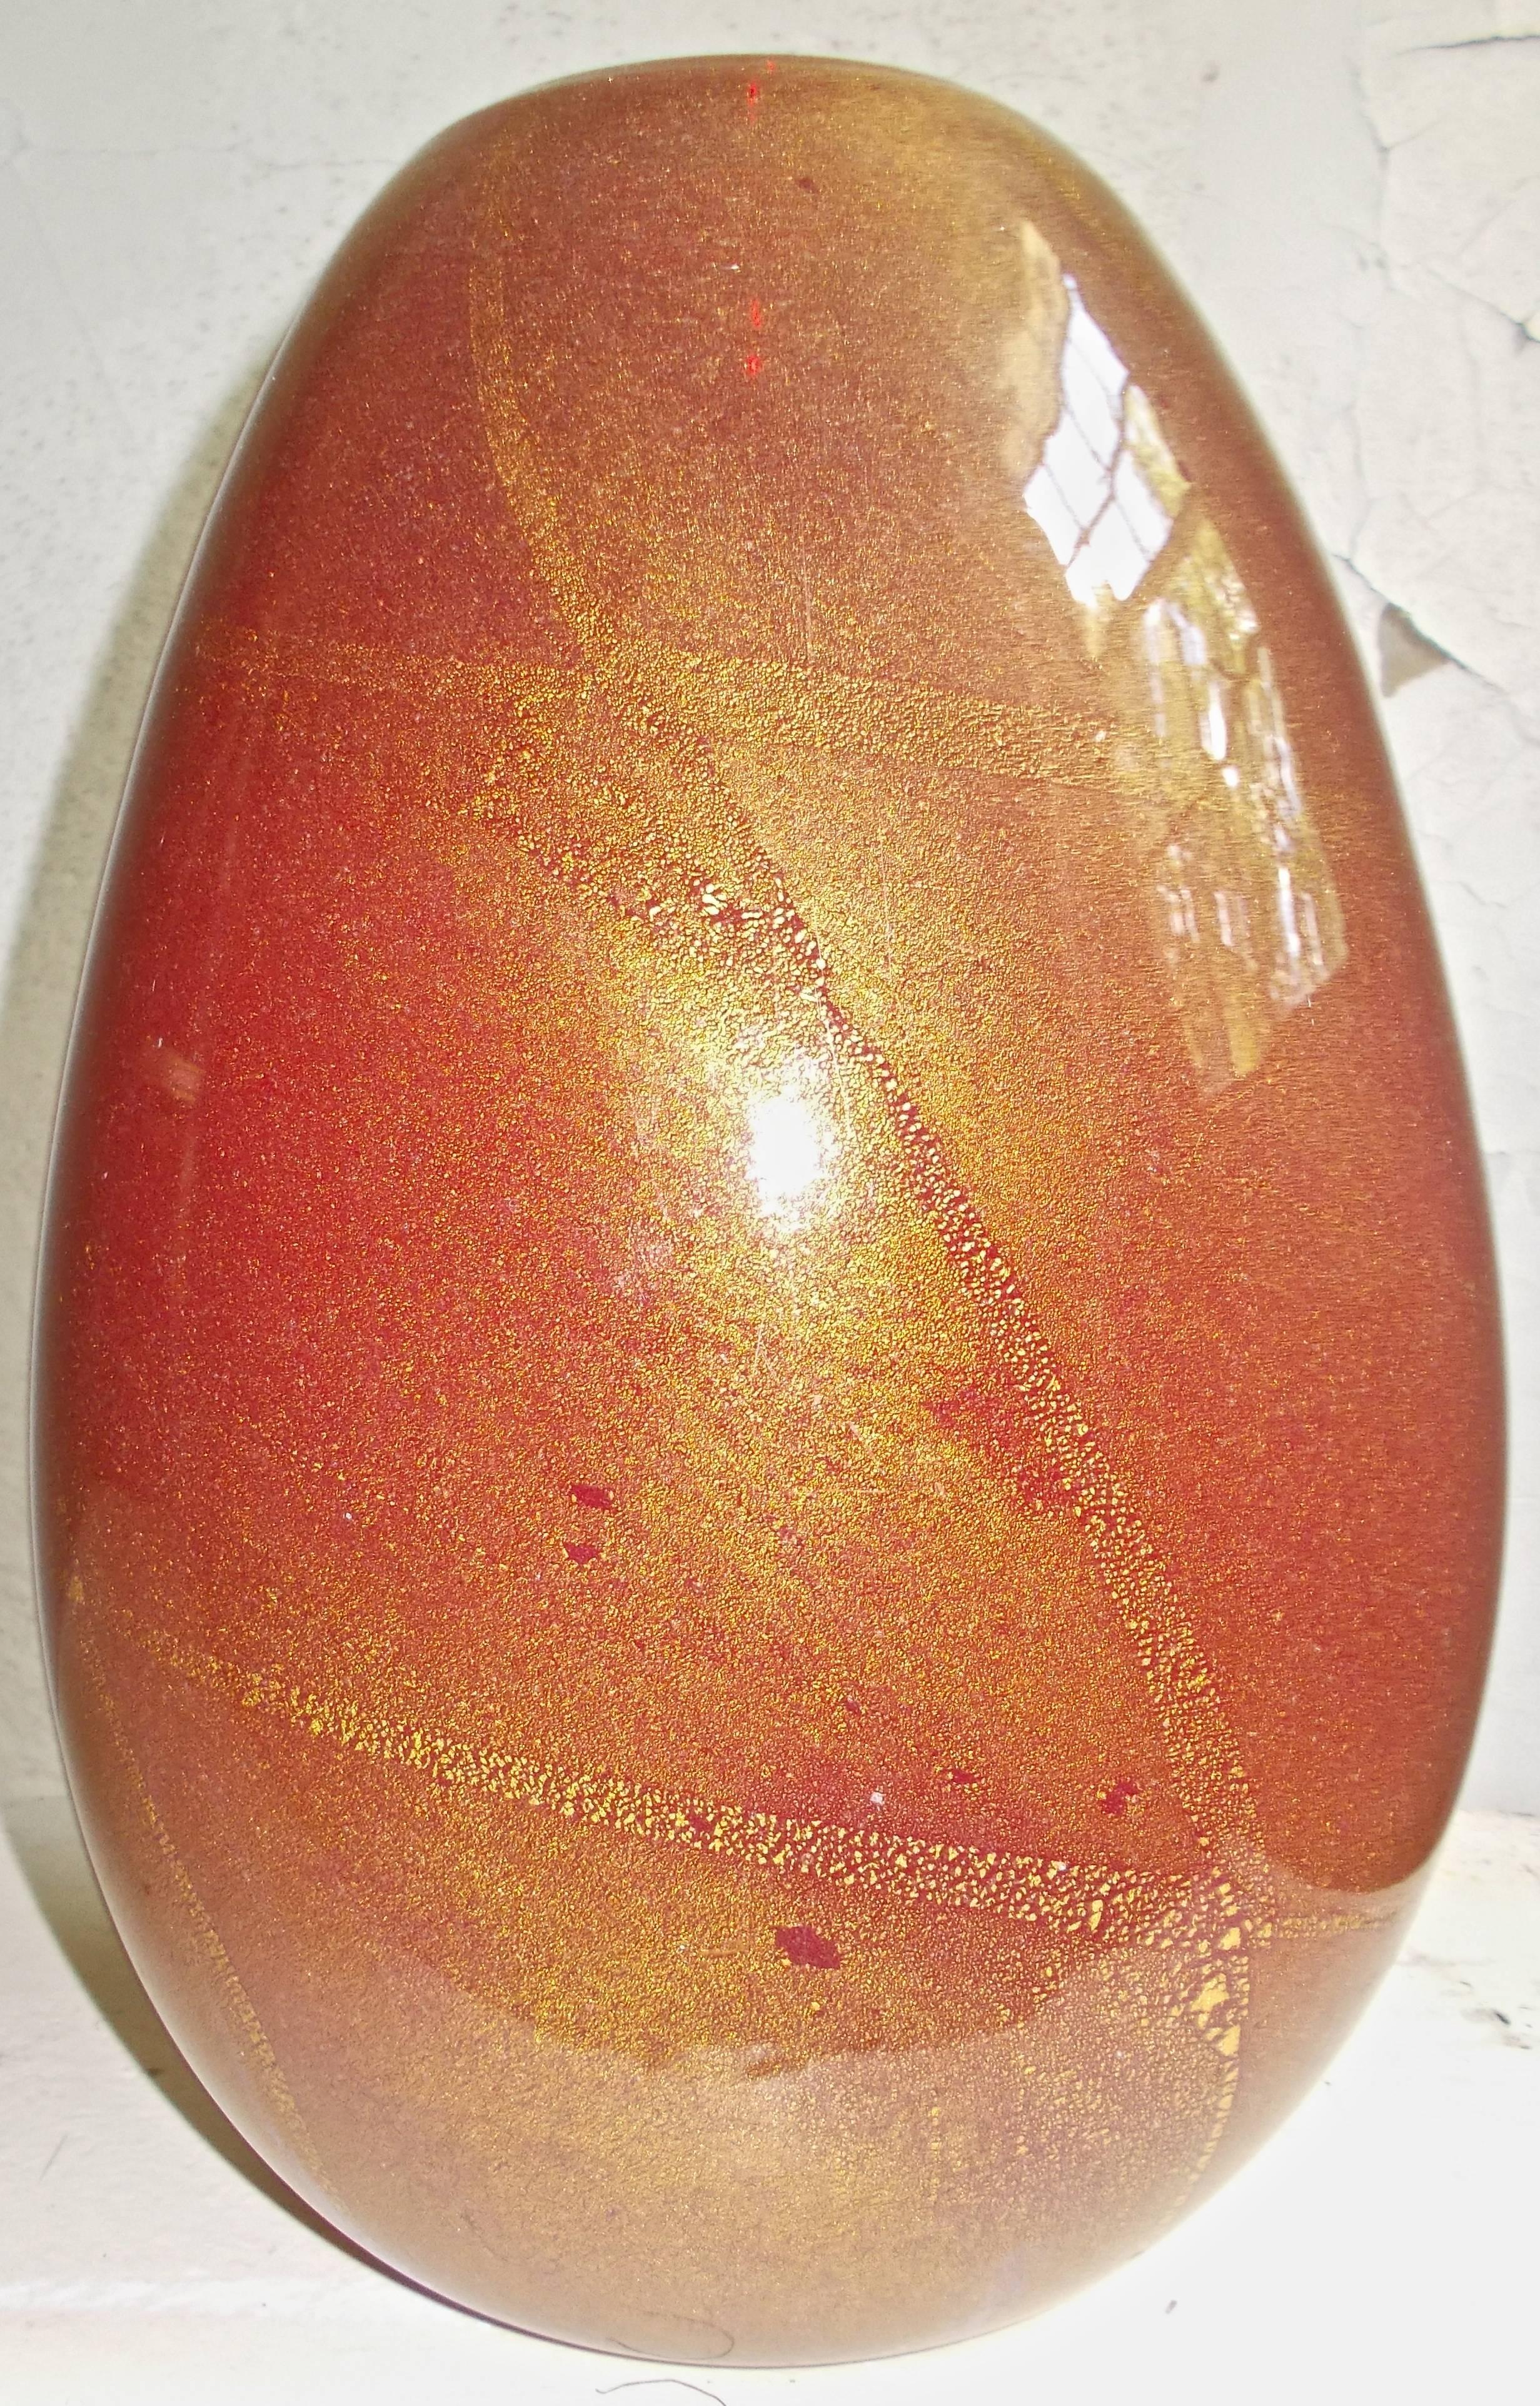 An important, late 1930s large Murano vase (29cm high). 'Sommerso'- a clear glass over a gold leaf, over very Fine bubbles over a deep rich red. As usual, unsigned. Bottom very worn. The design director of Seguso Vetri d'Arte was Flavio Poli from